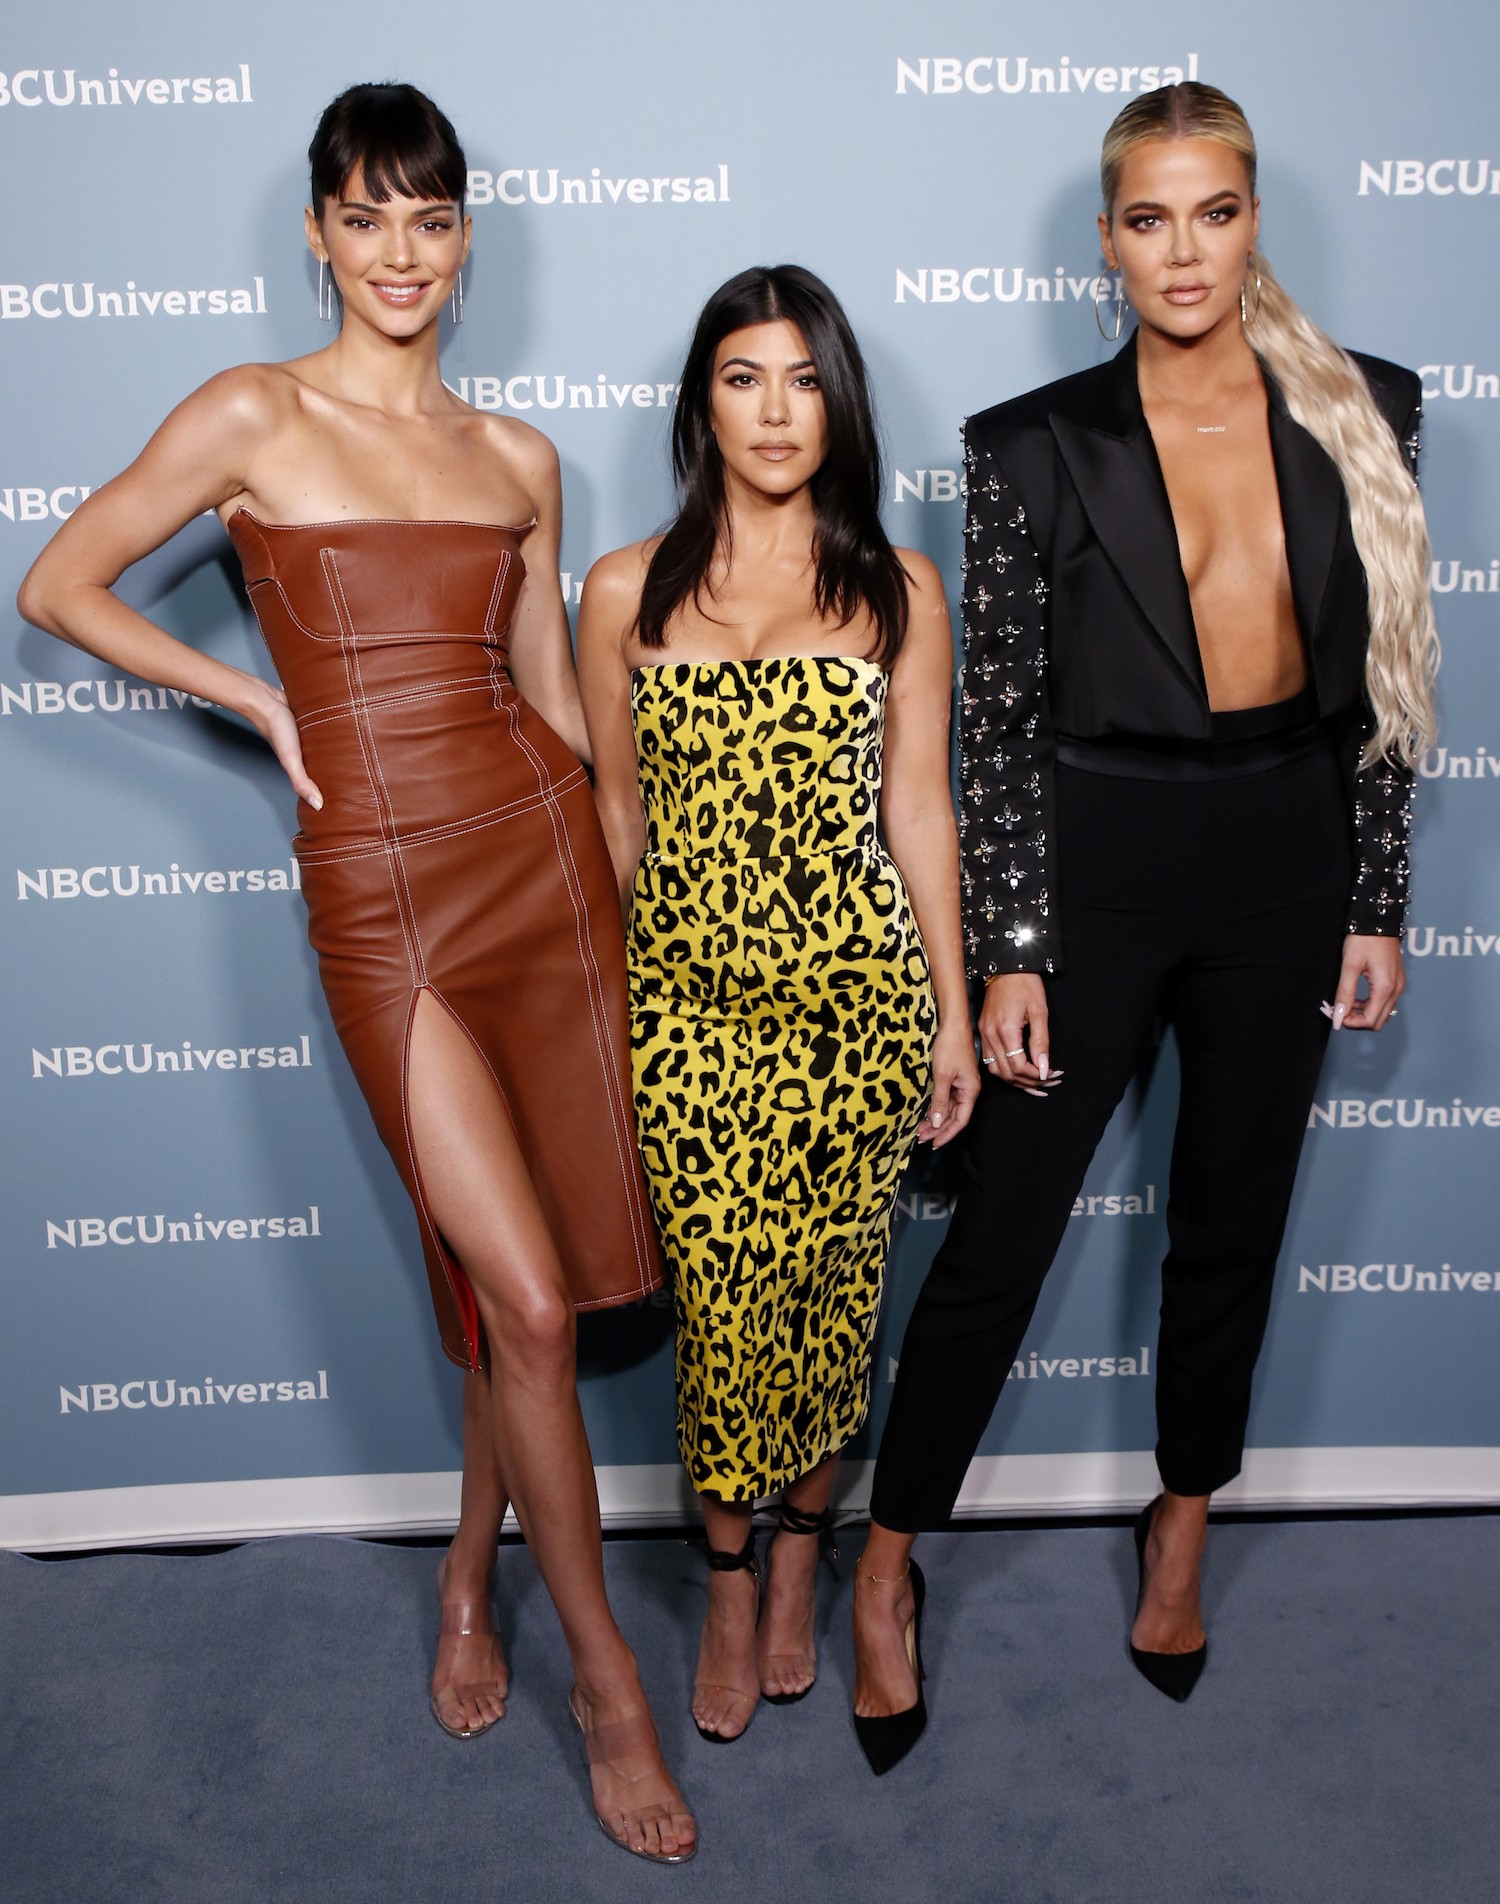 NBCUNIVERSAL UPFRONT EVENTS -- 2019 NBCUniversal Upfront in New York City on Monday, May 13, 2019 -- Pictured: (l-r) Kendall Jenner, Kourtney Kardashian, Khloe Kardashian, "Keeping up with The Kardashians" on E! Entertainment -- (Photo by: Heidi Gutman/NB (Foto: NBCU Photo Bank via Getty Images)